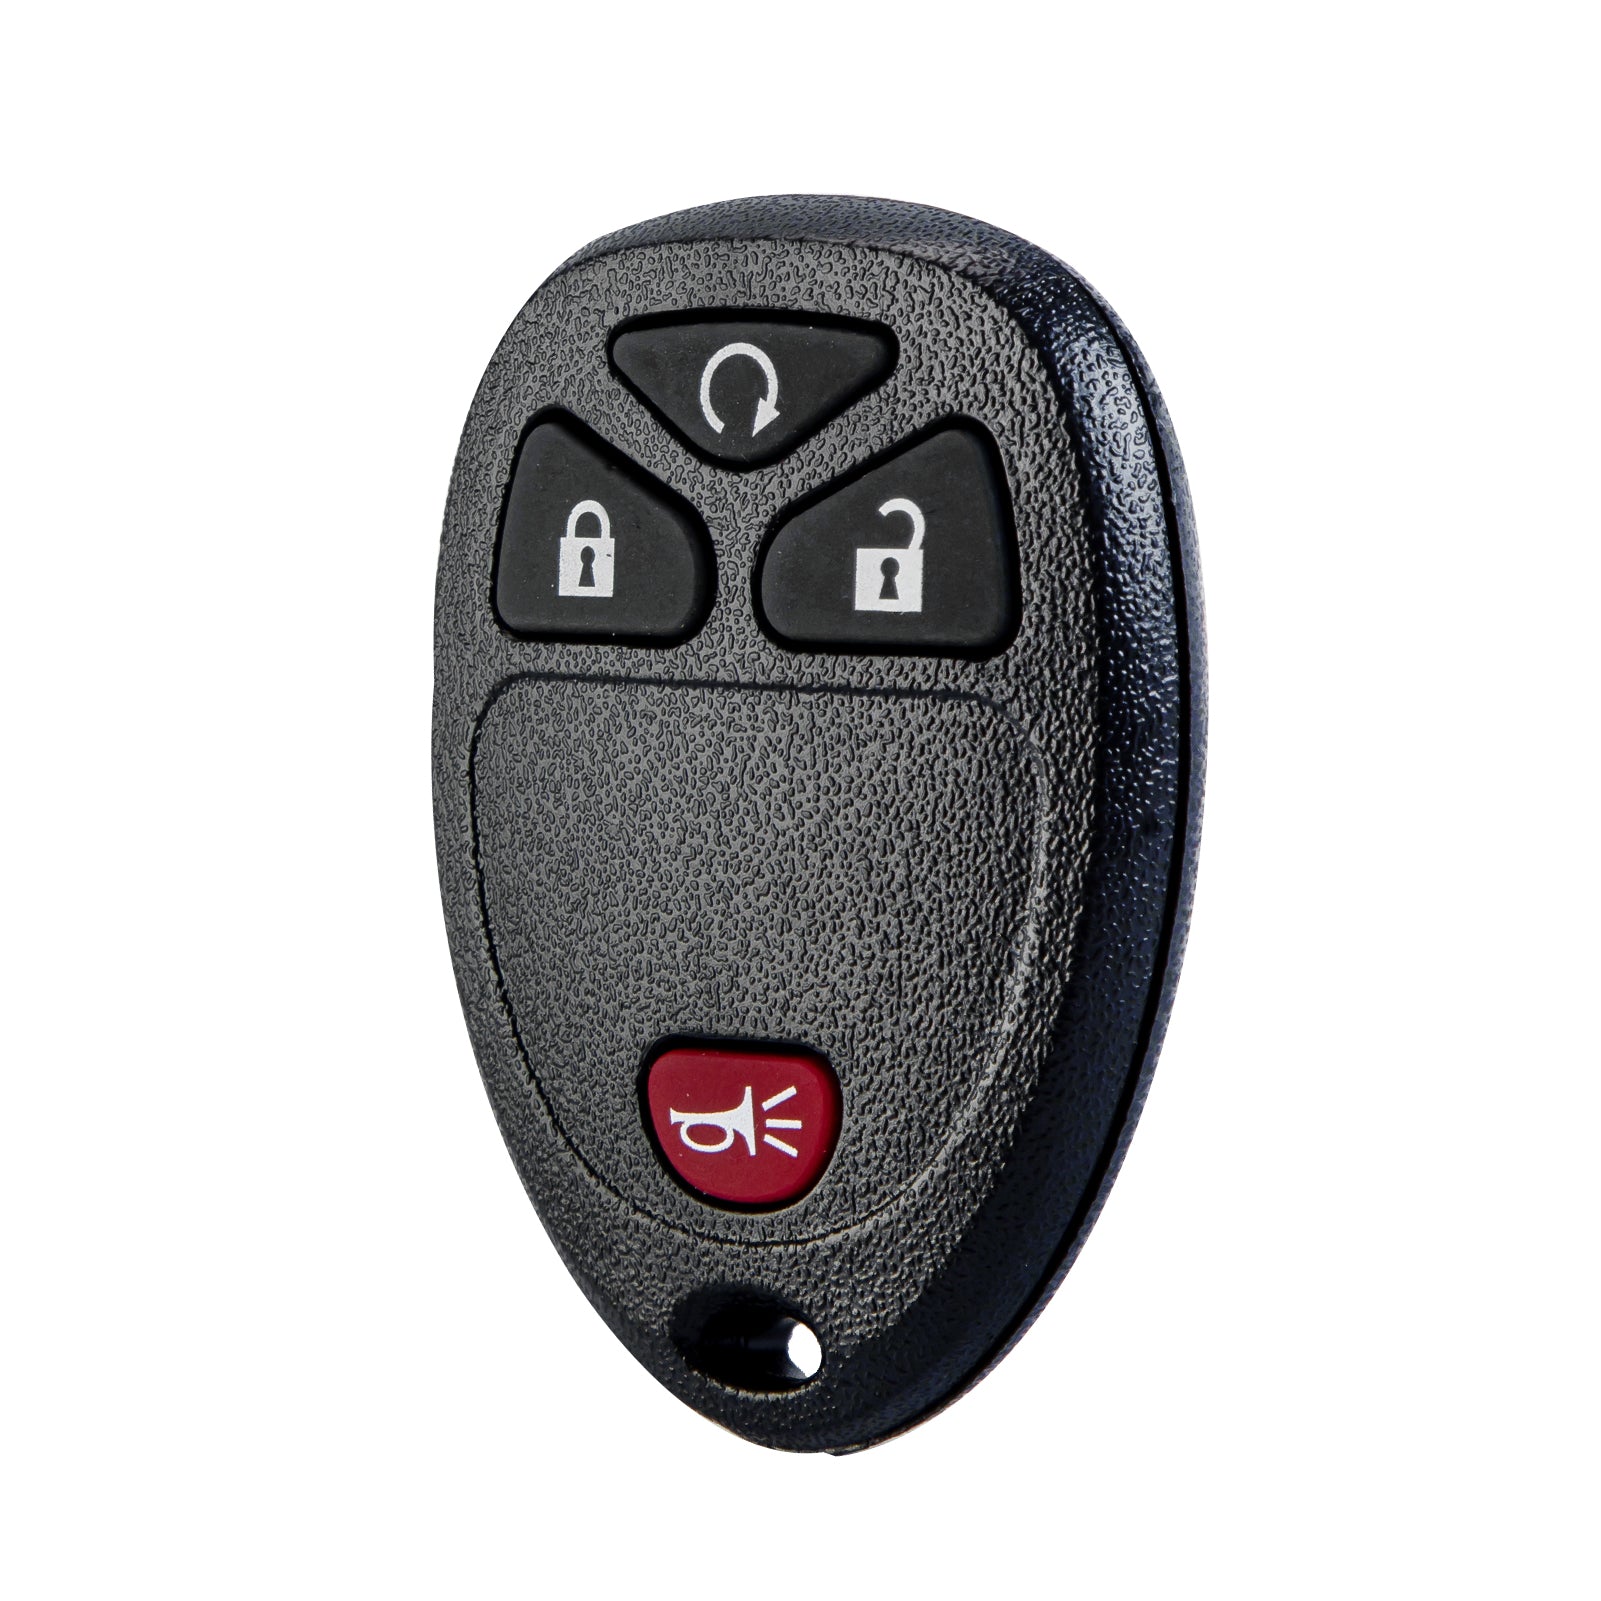 Replacement for 2006-2011 Chevrolet HHR 4 Button Keyless Entry Remote KOBGT04A